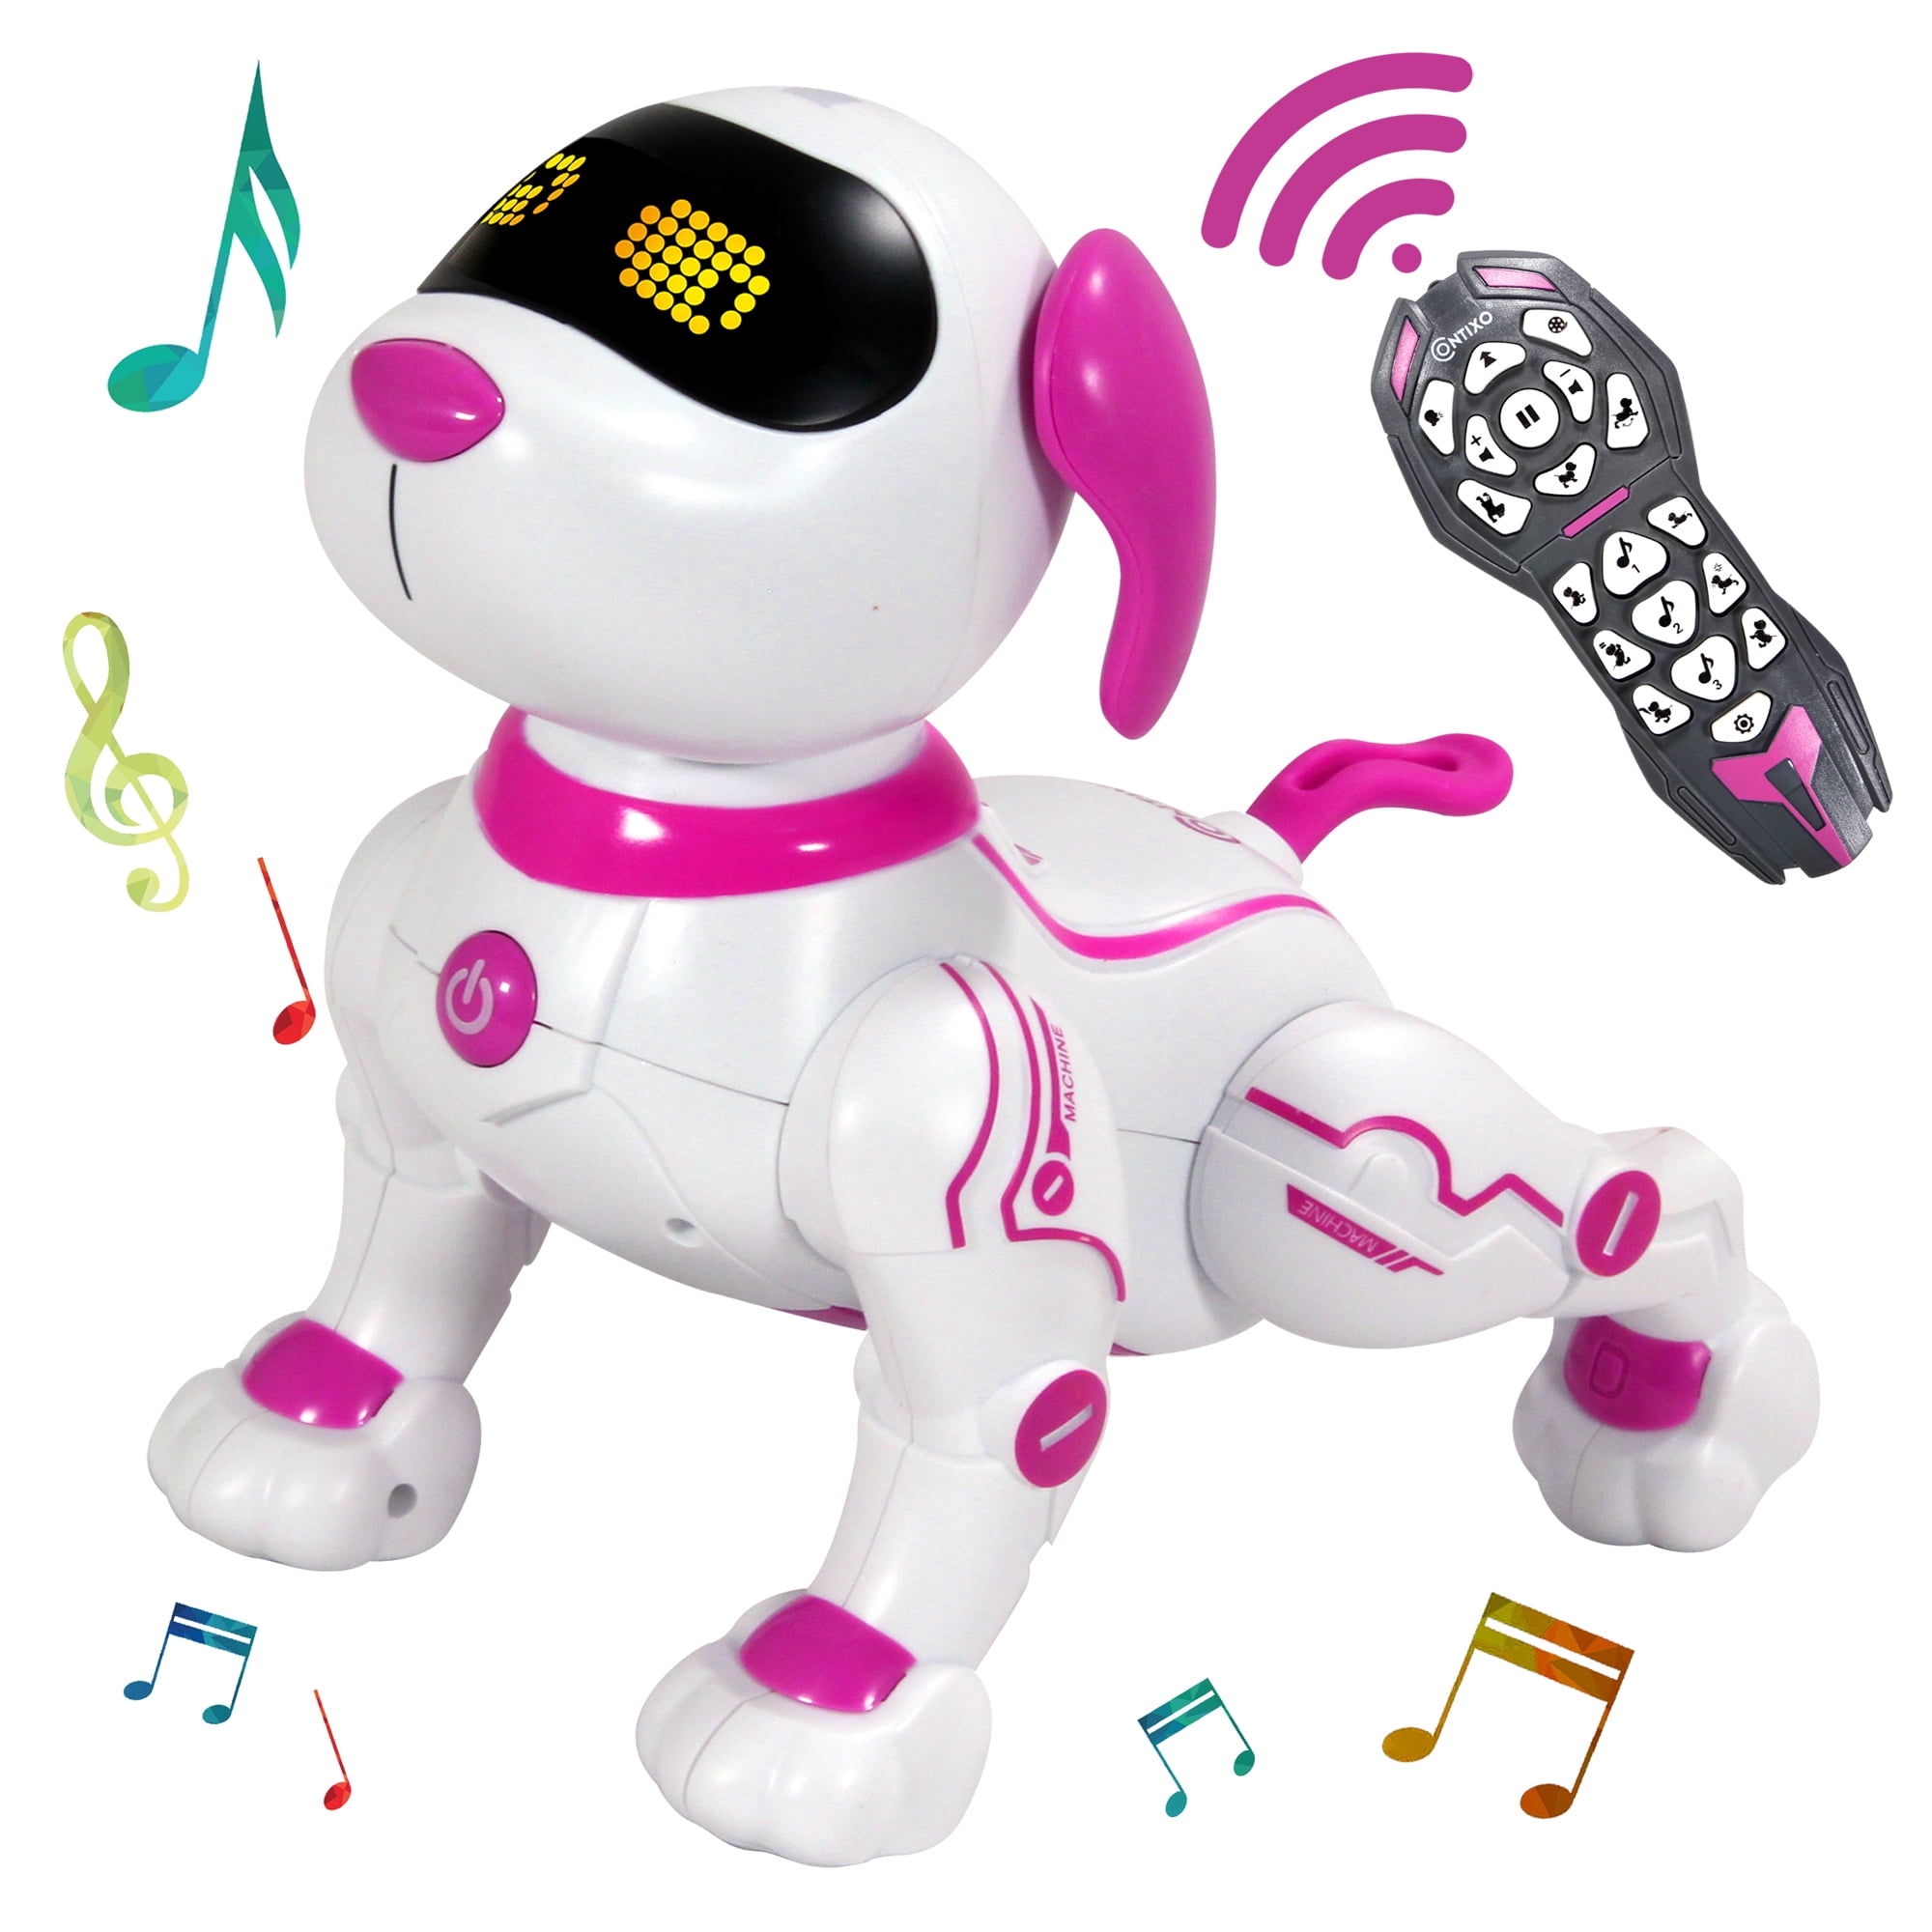 Wireless Interactive Robot Horse Remote Control Pet for Kids Birthday Gift 